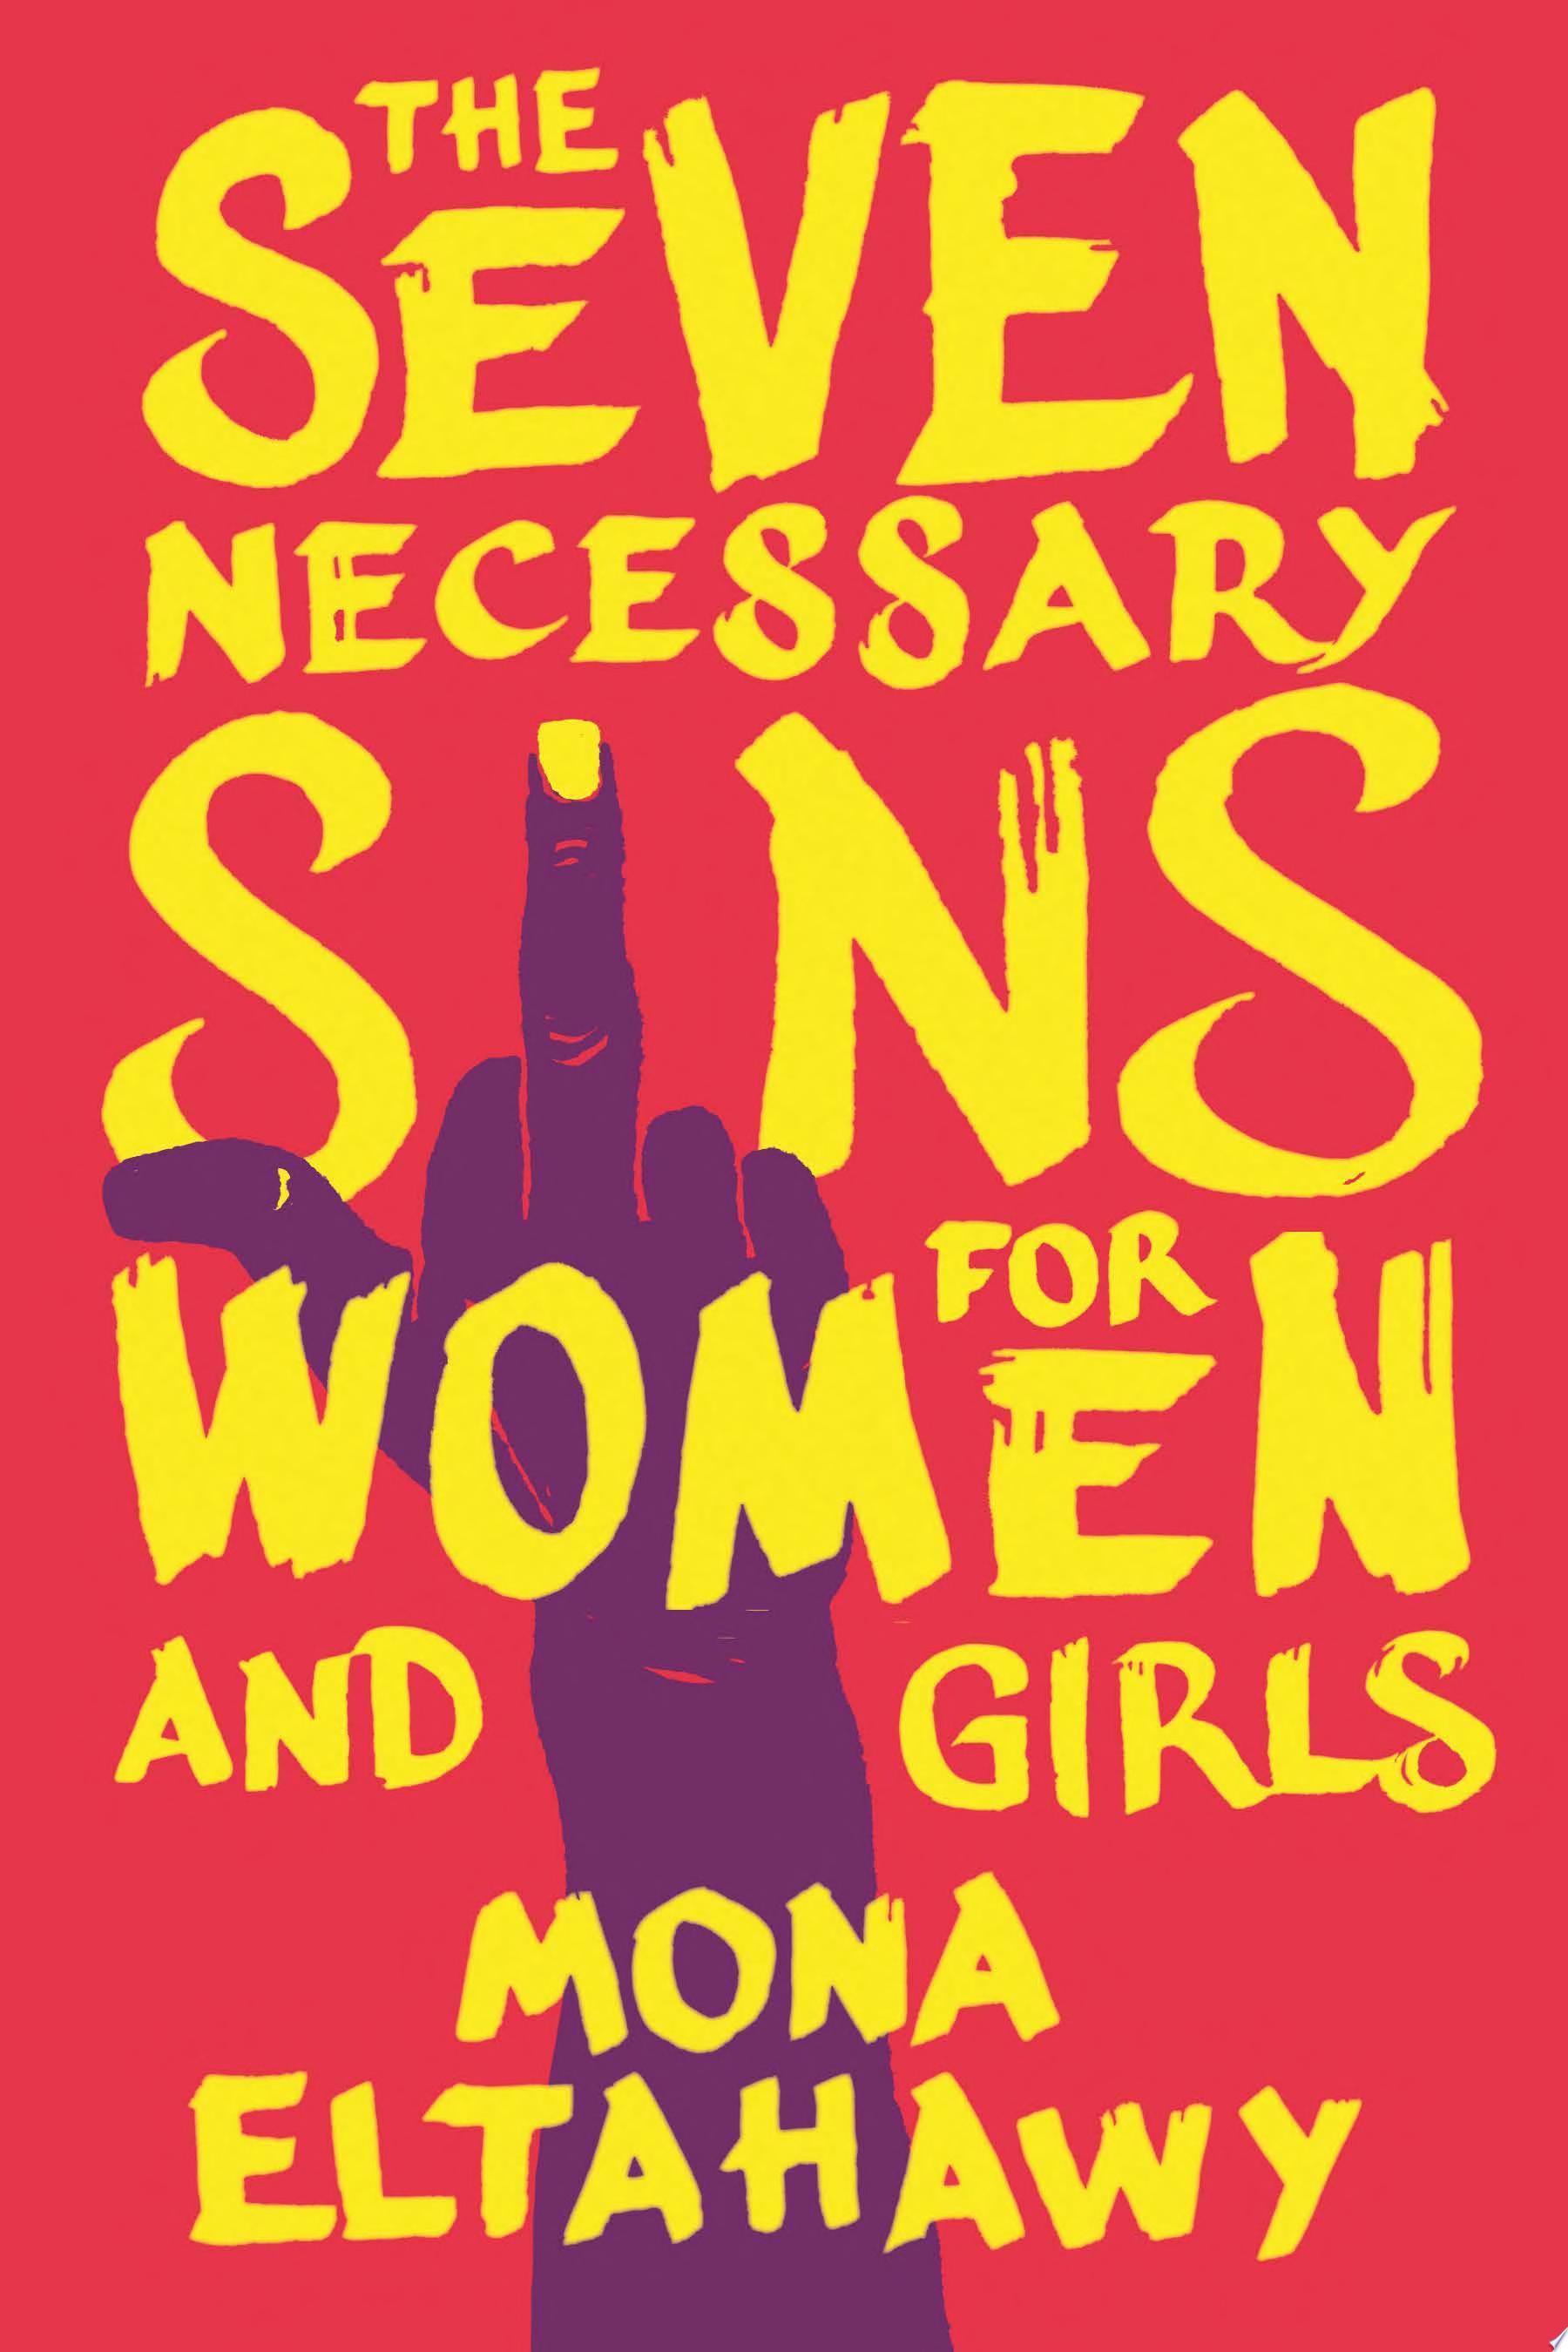 Image for "The Seven Necessary Sins for Women and Girls"